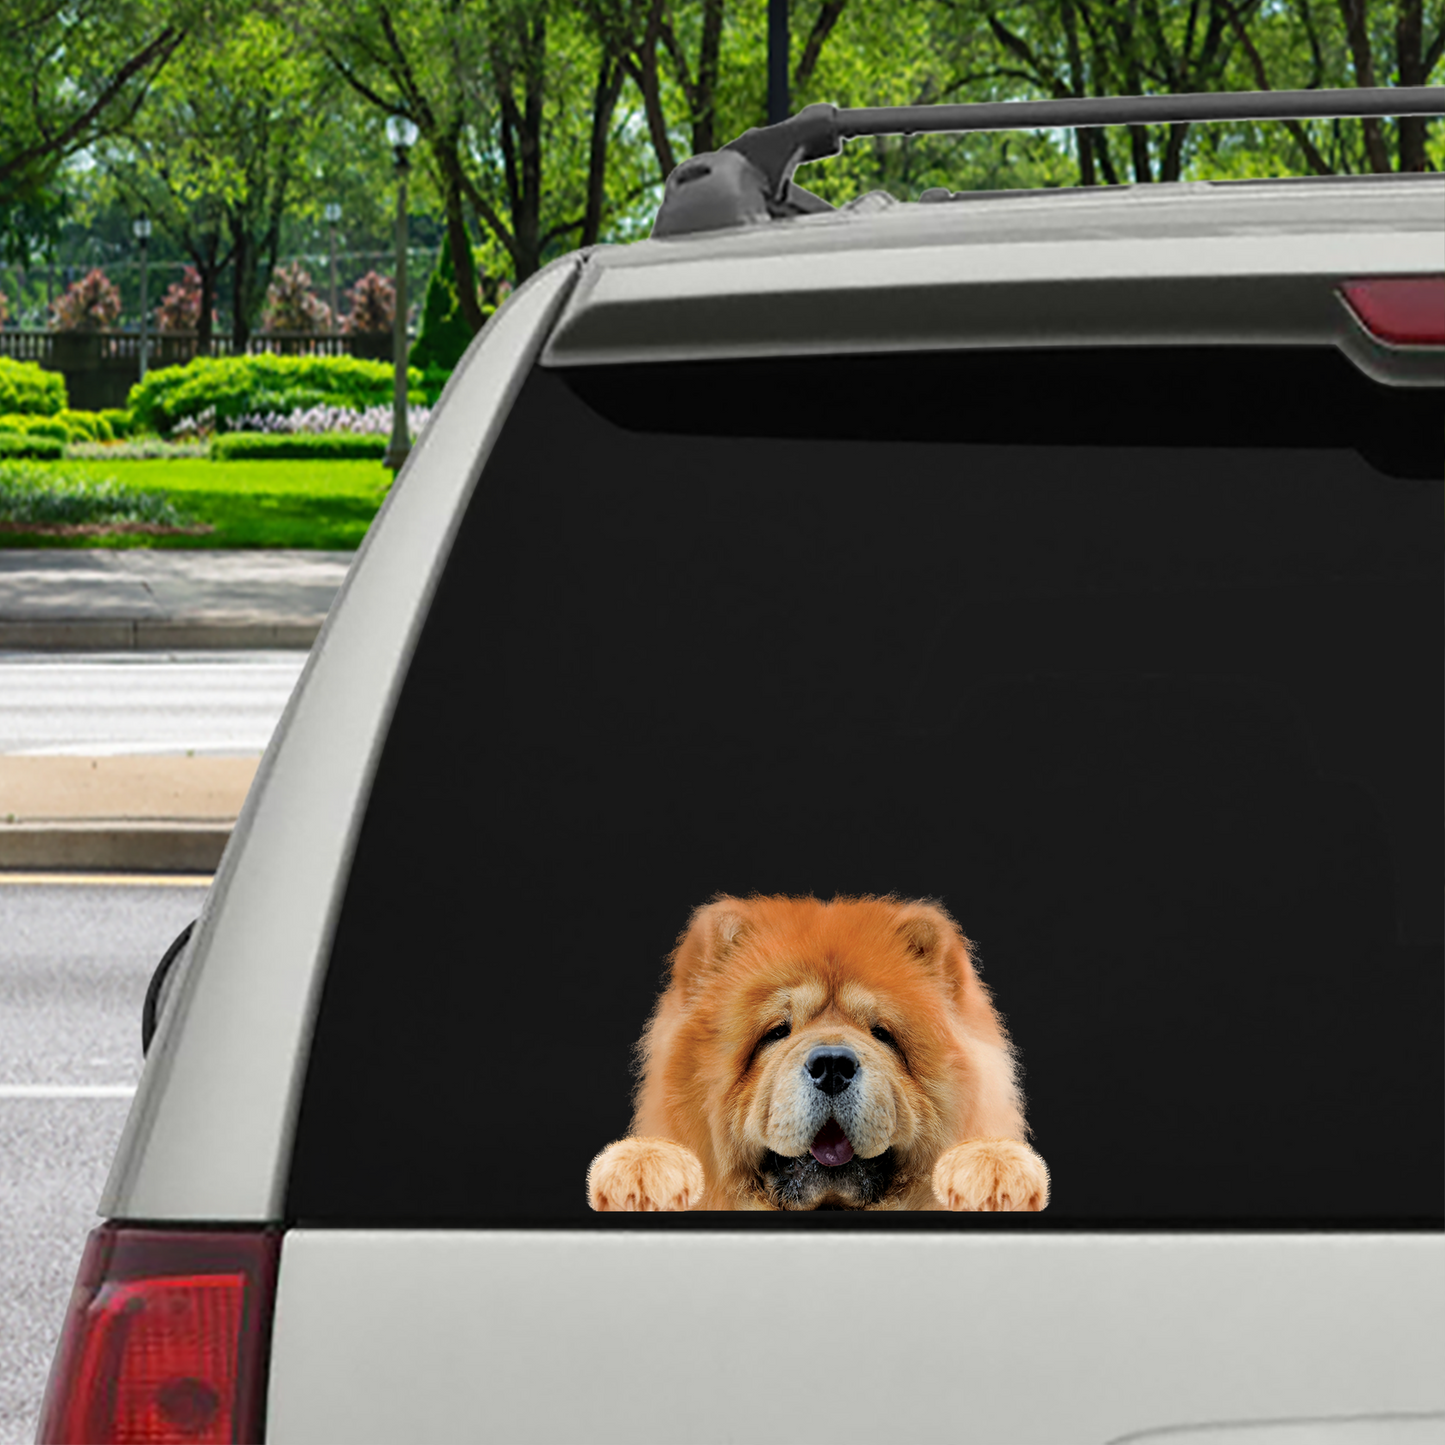 Can You See Me Now - Chow Chow Car/ Door/ Fridge/ Laptop Sticker V1